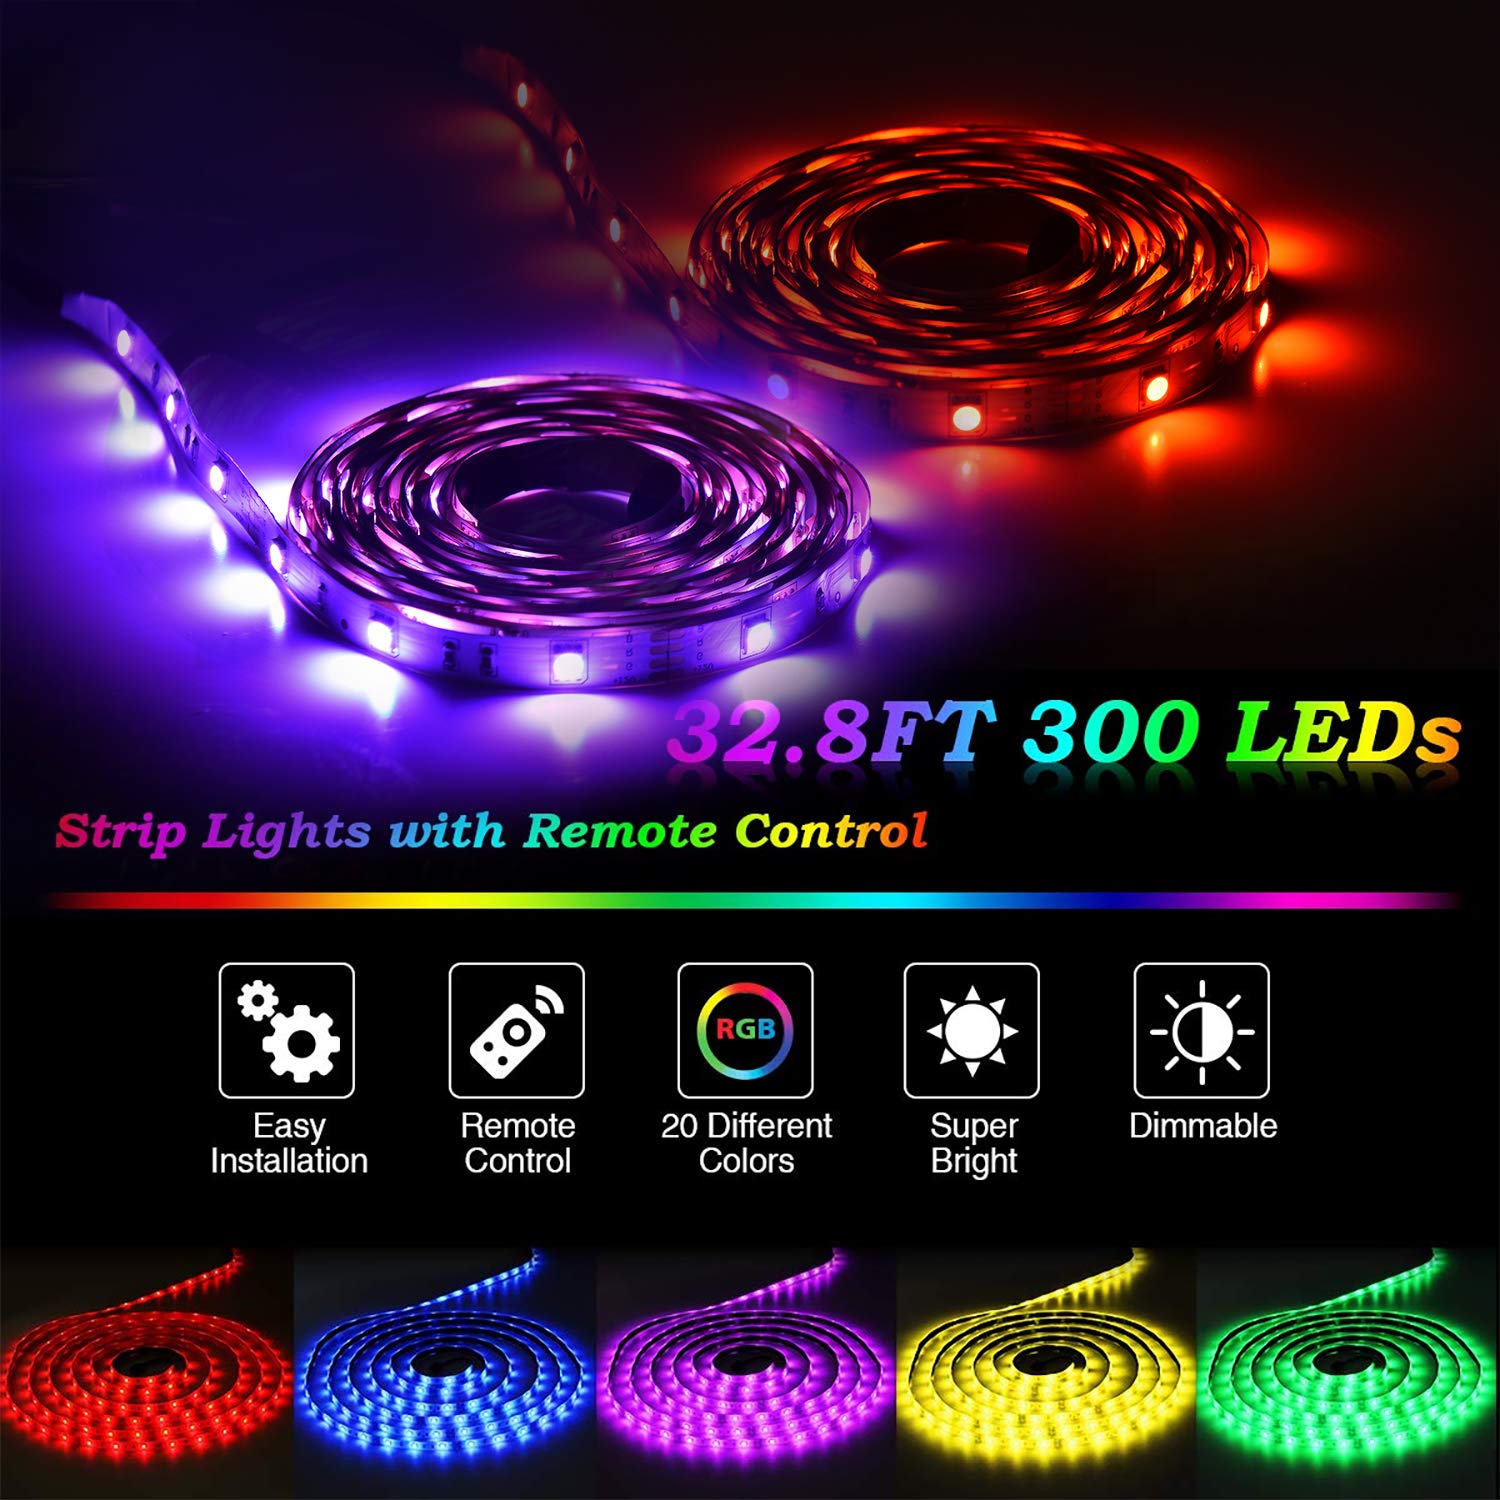 WEAPRIL Led Strip Lights,32.8FT/10M Flexible Tape Lights Color Changing 300 LEDs SMD5050 RGB Strip Lights Kit with 24key Remote Control for Home Bedroom Kitchen and Party, Non-Waterproof (32.8FT)